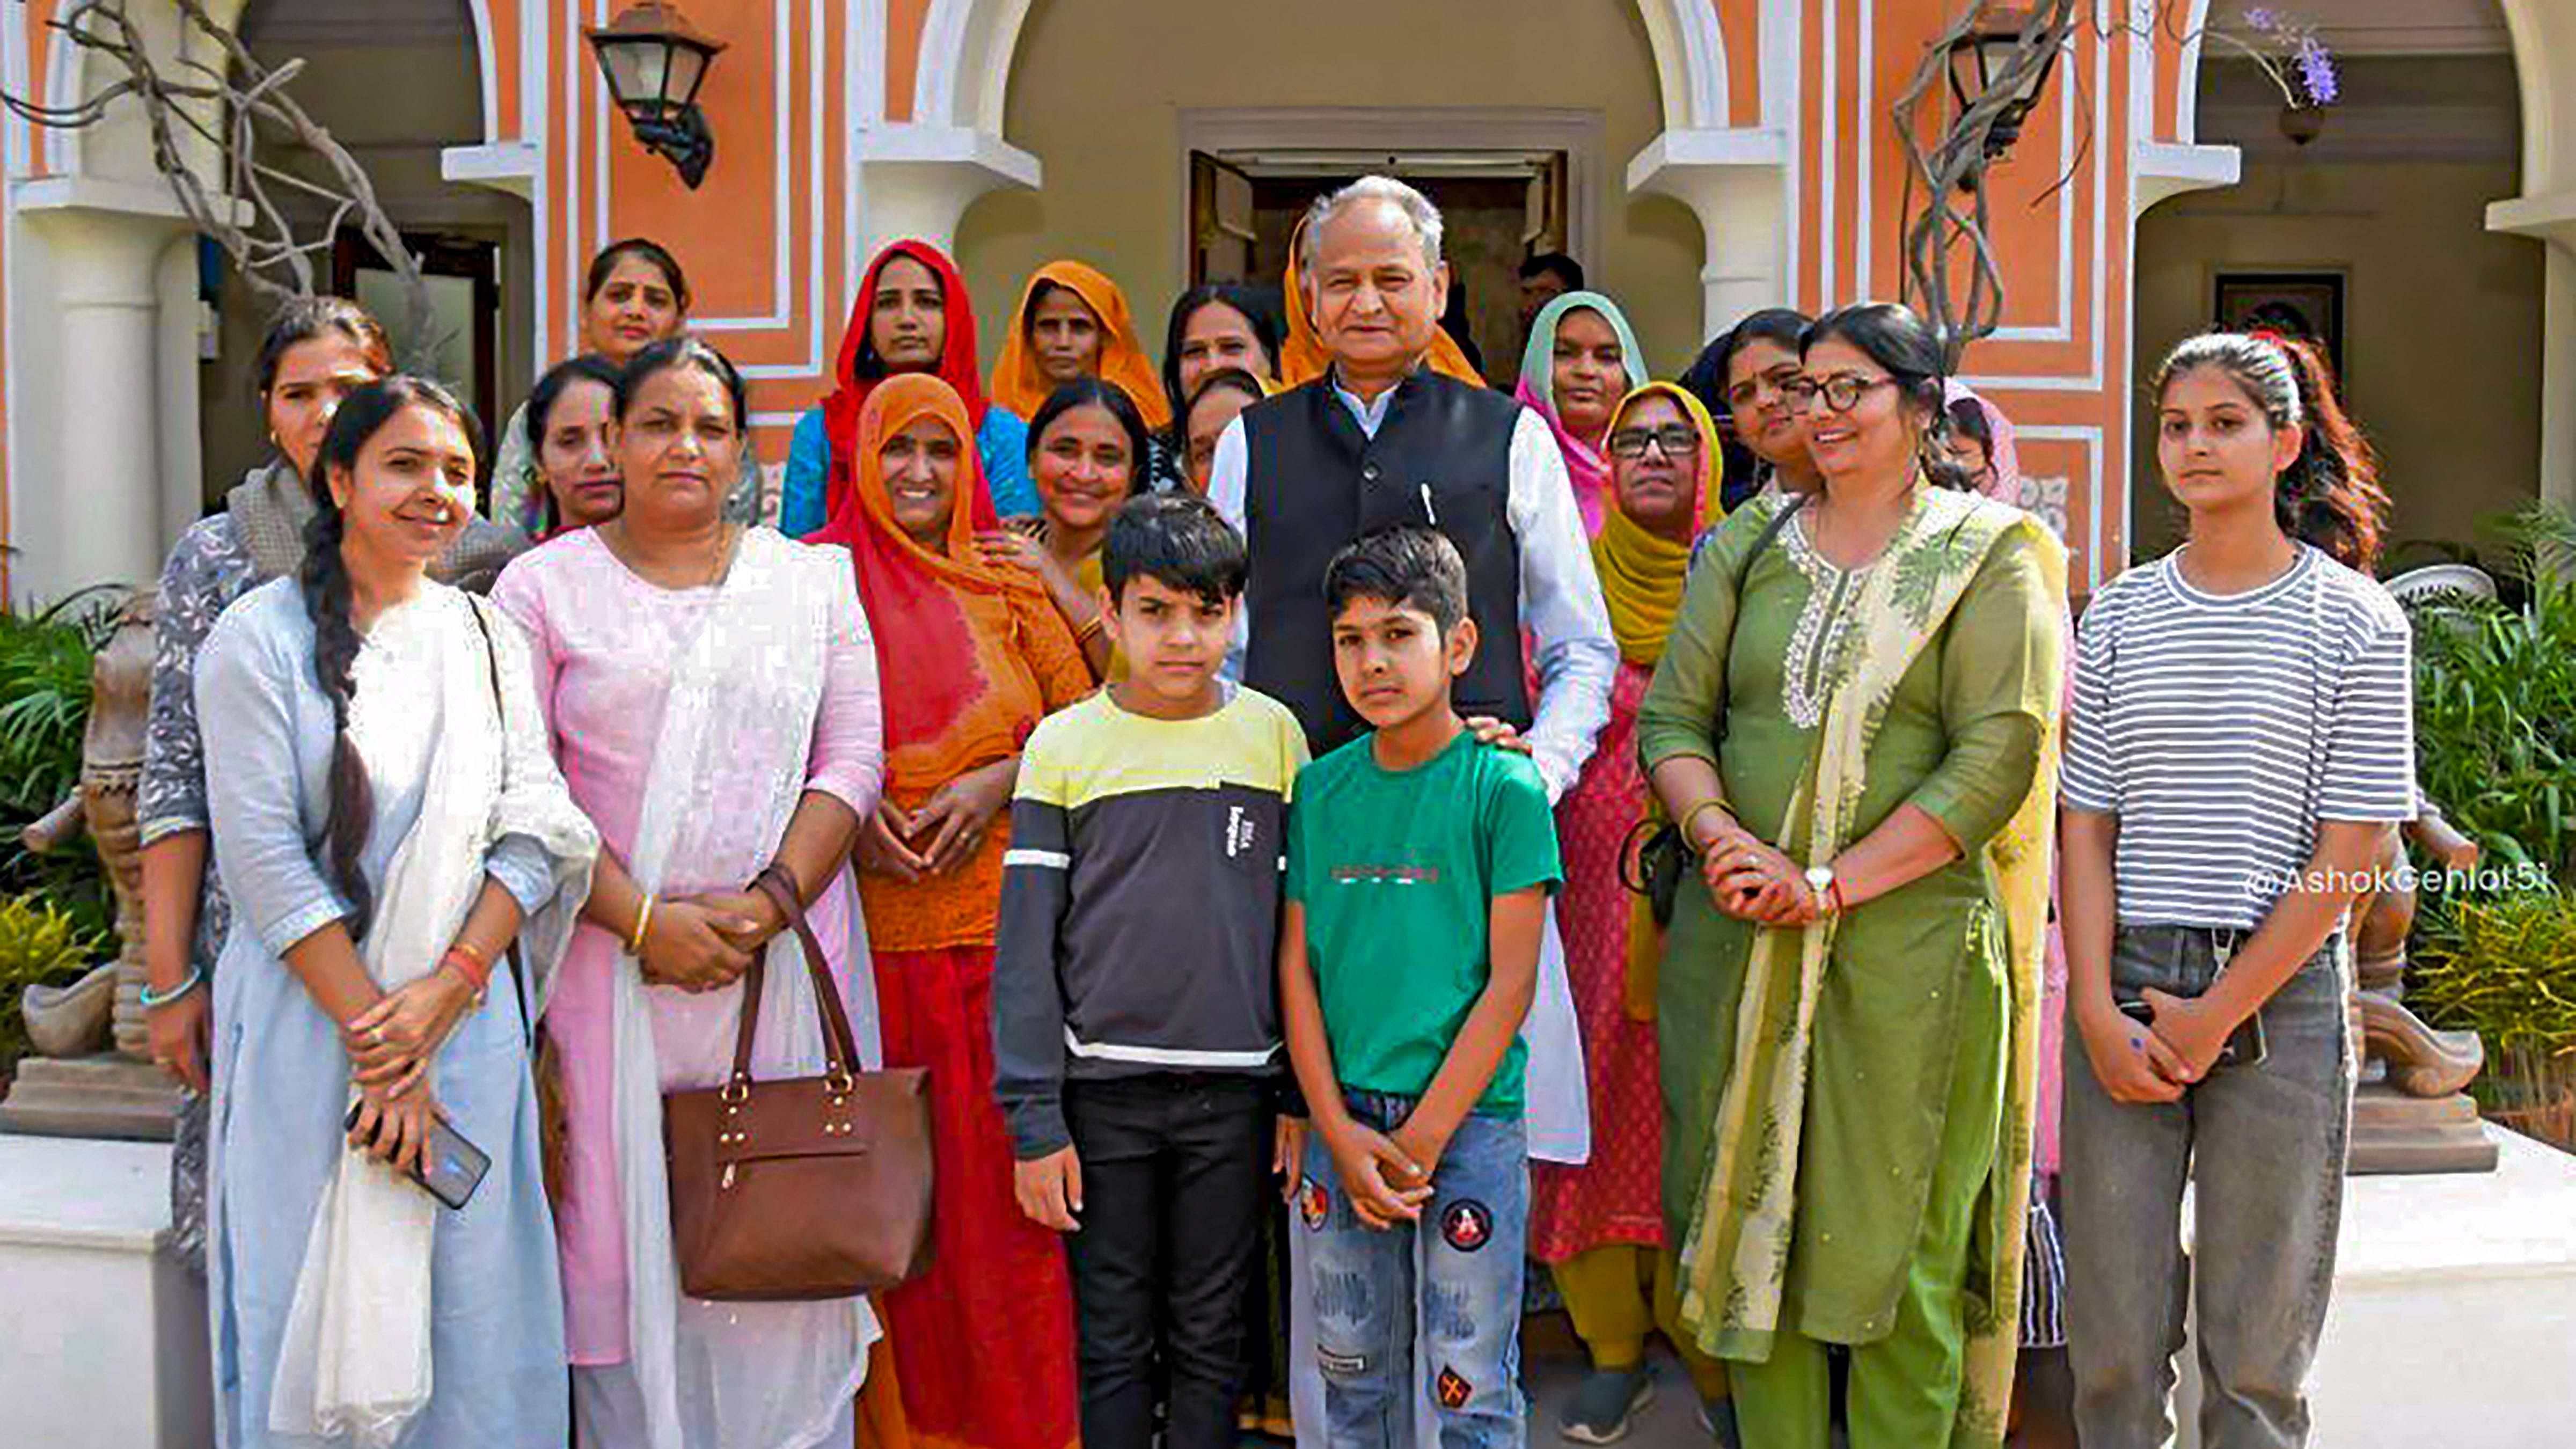 Rajasthan CM Ashok Gehlot in a group photo with the family members of martyrs, in Jaipur. Credit: PTI Photo